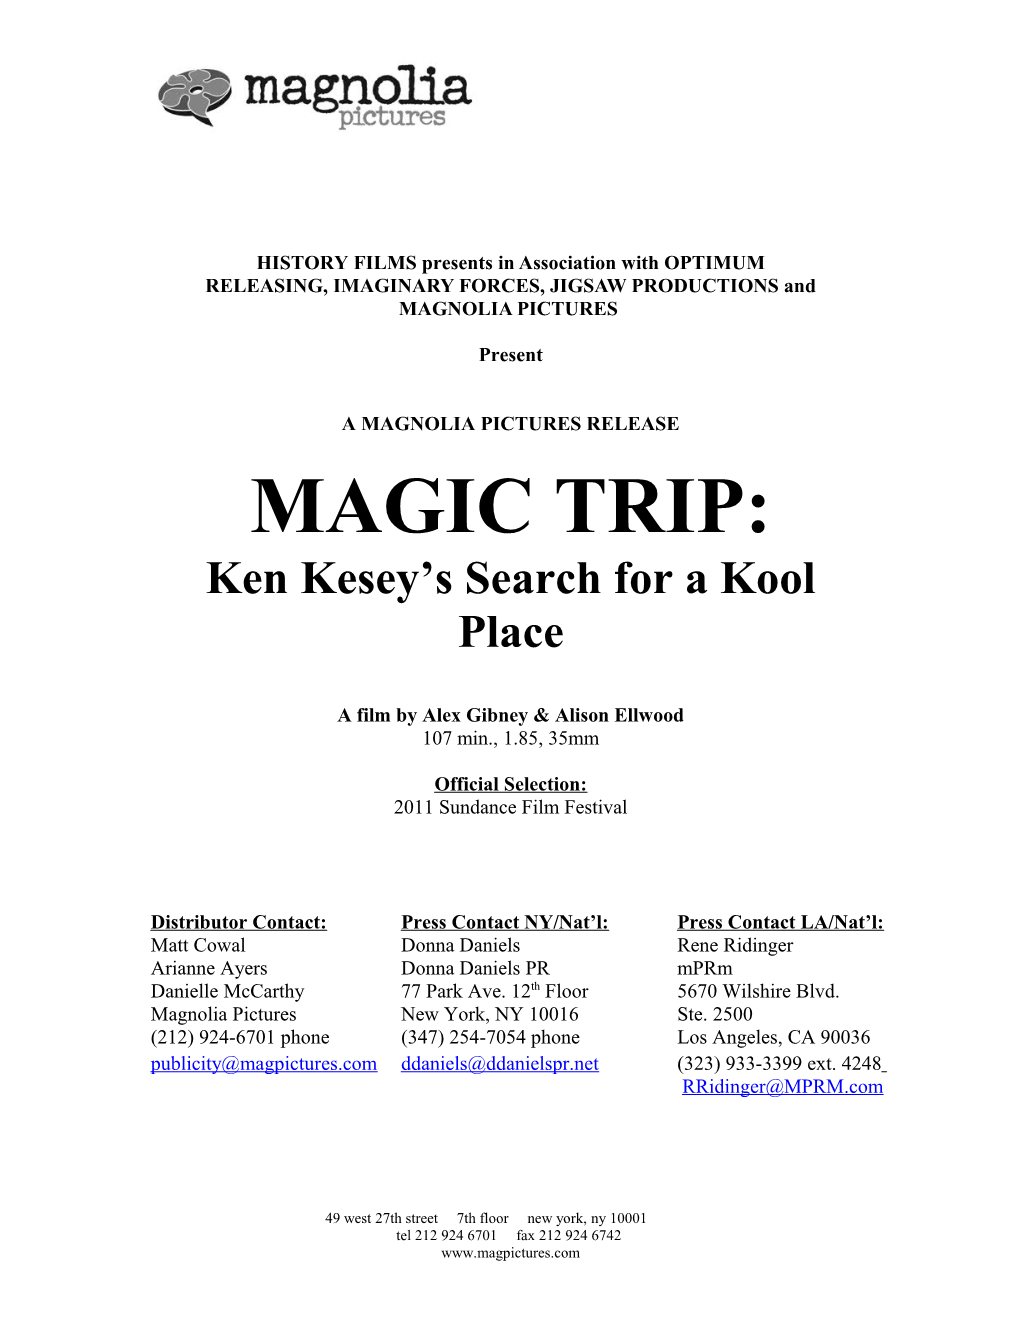 Ken Kesey S Search for a Kool Place